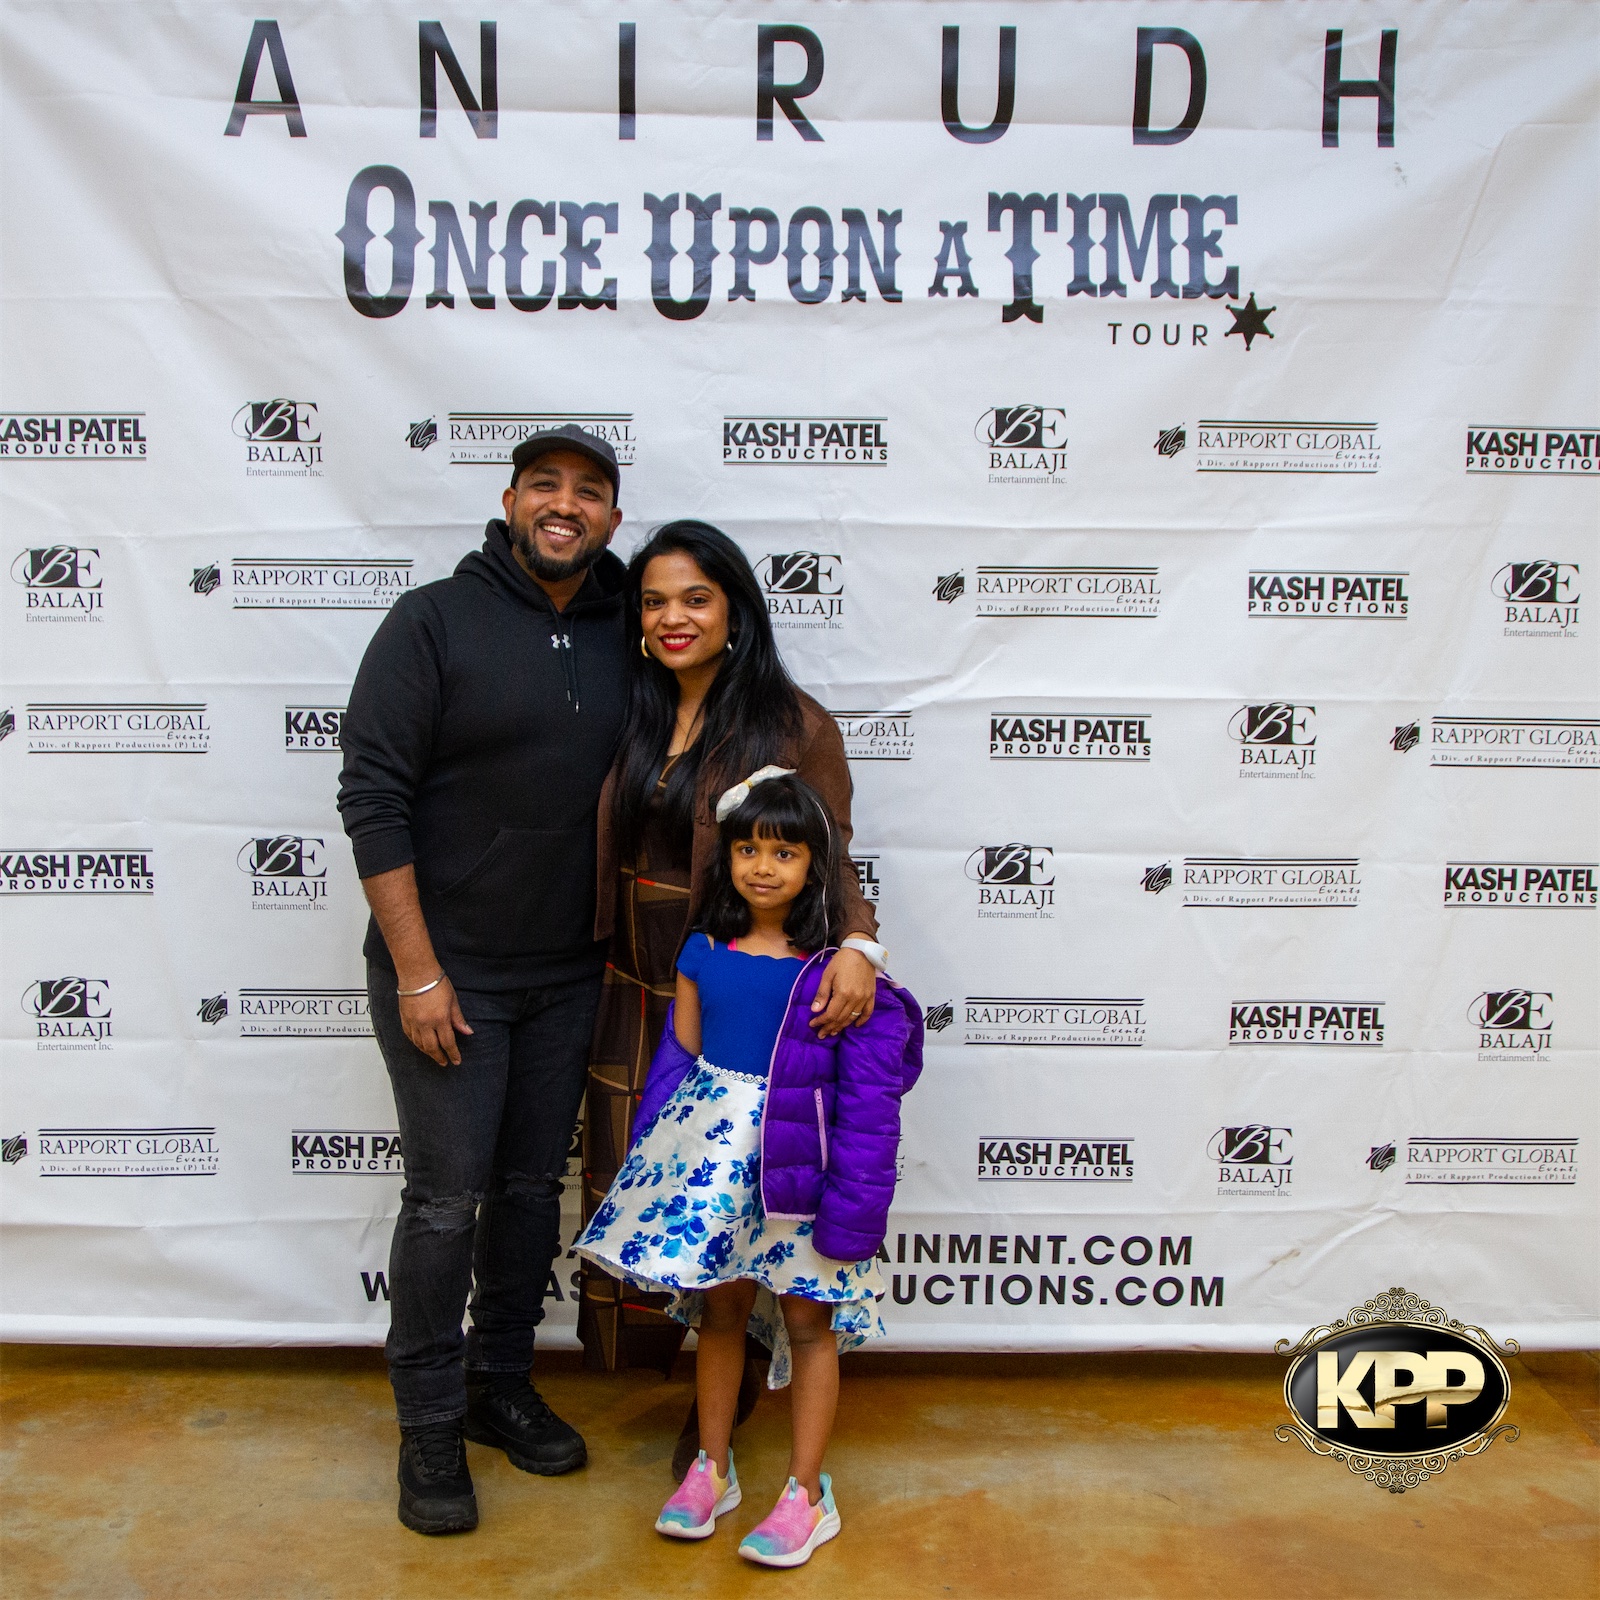 Kash Patel Productions Anirudh Once Upon A Time World Tour Preshow Dallas TX Curtis Culwell Center 53